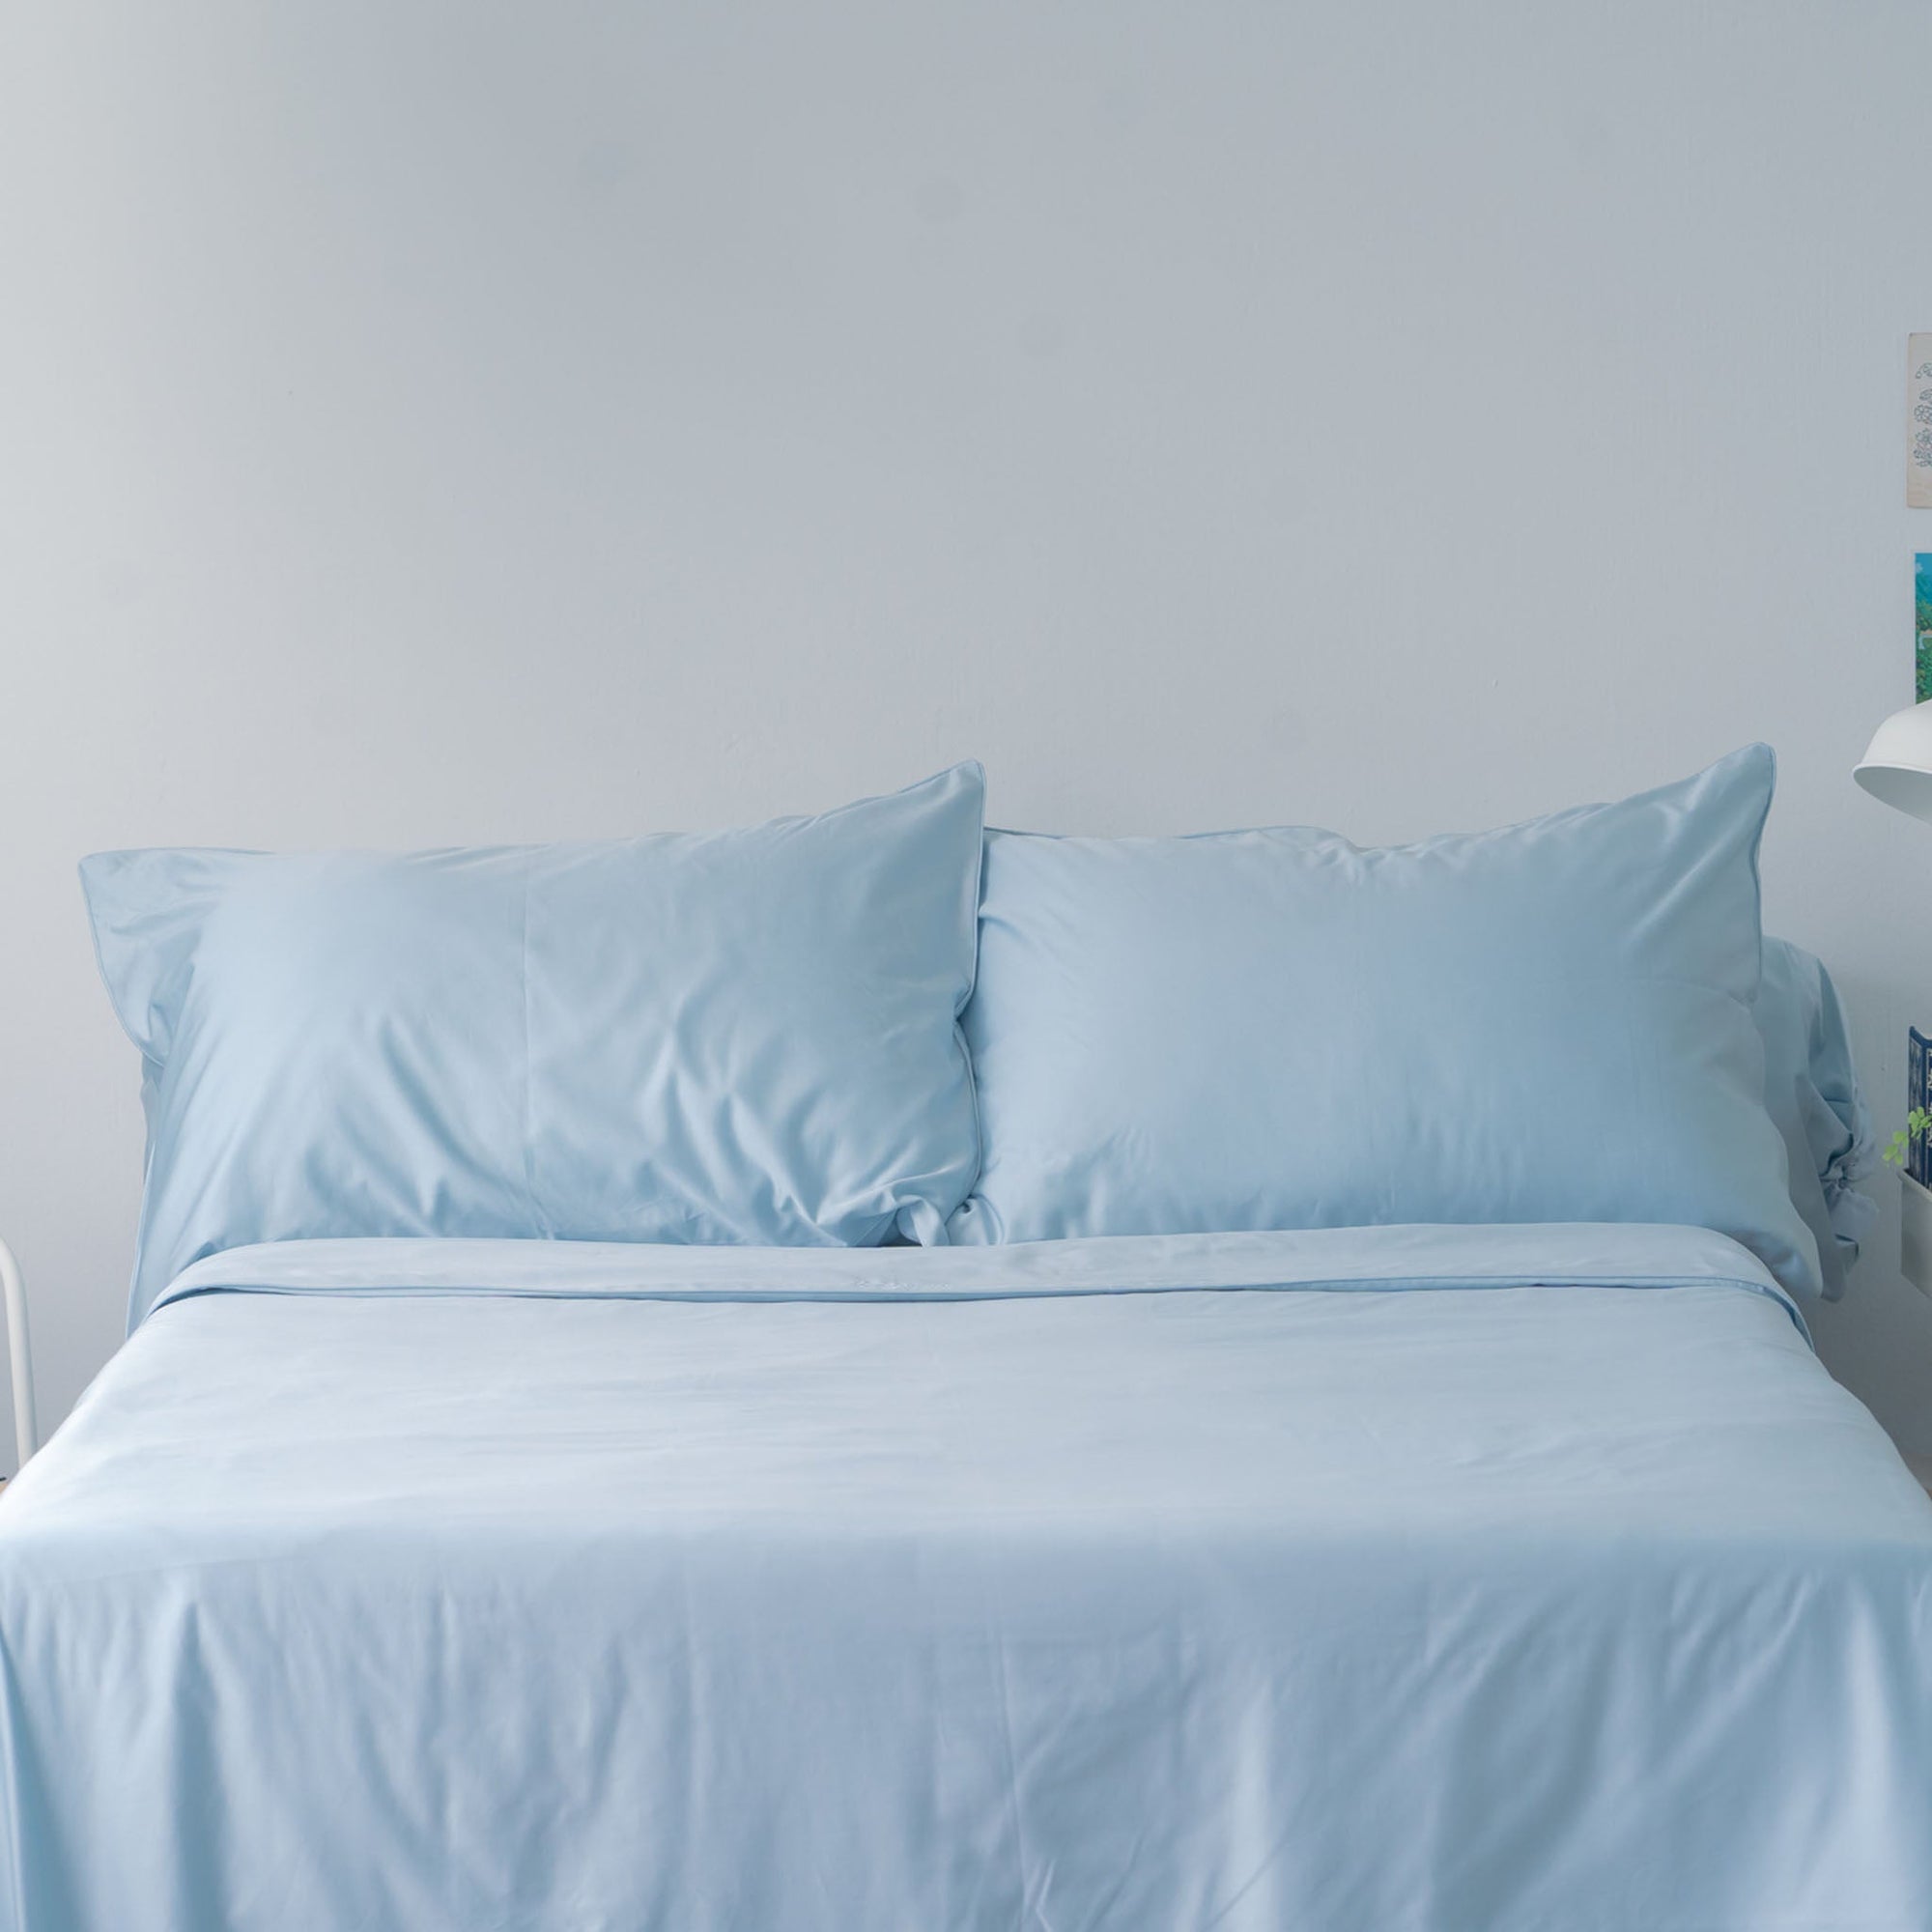 Glacier Blue Cotton Bed Sheets Classic Set with Cotton Fitted Sheet, Cotton Pillow Case, Cotton Duvet Cover. Buy Glacier Blue Bed Sheets at Weavve Home, Shop Egyptian Cotton Bed Sheets Singapore and Luxury Hotel Sheets. 600 High Thread Count Bed Sheet. 